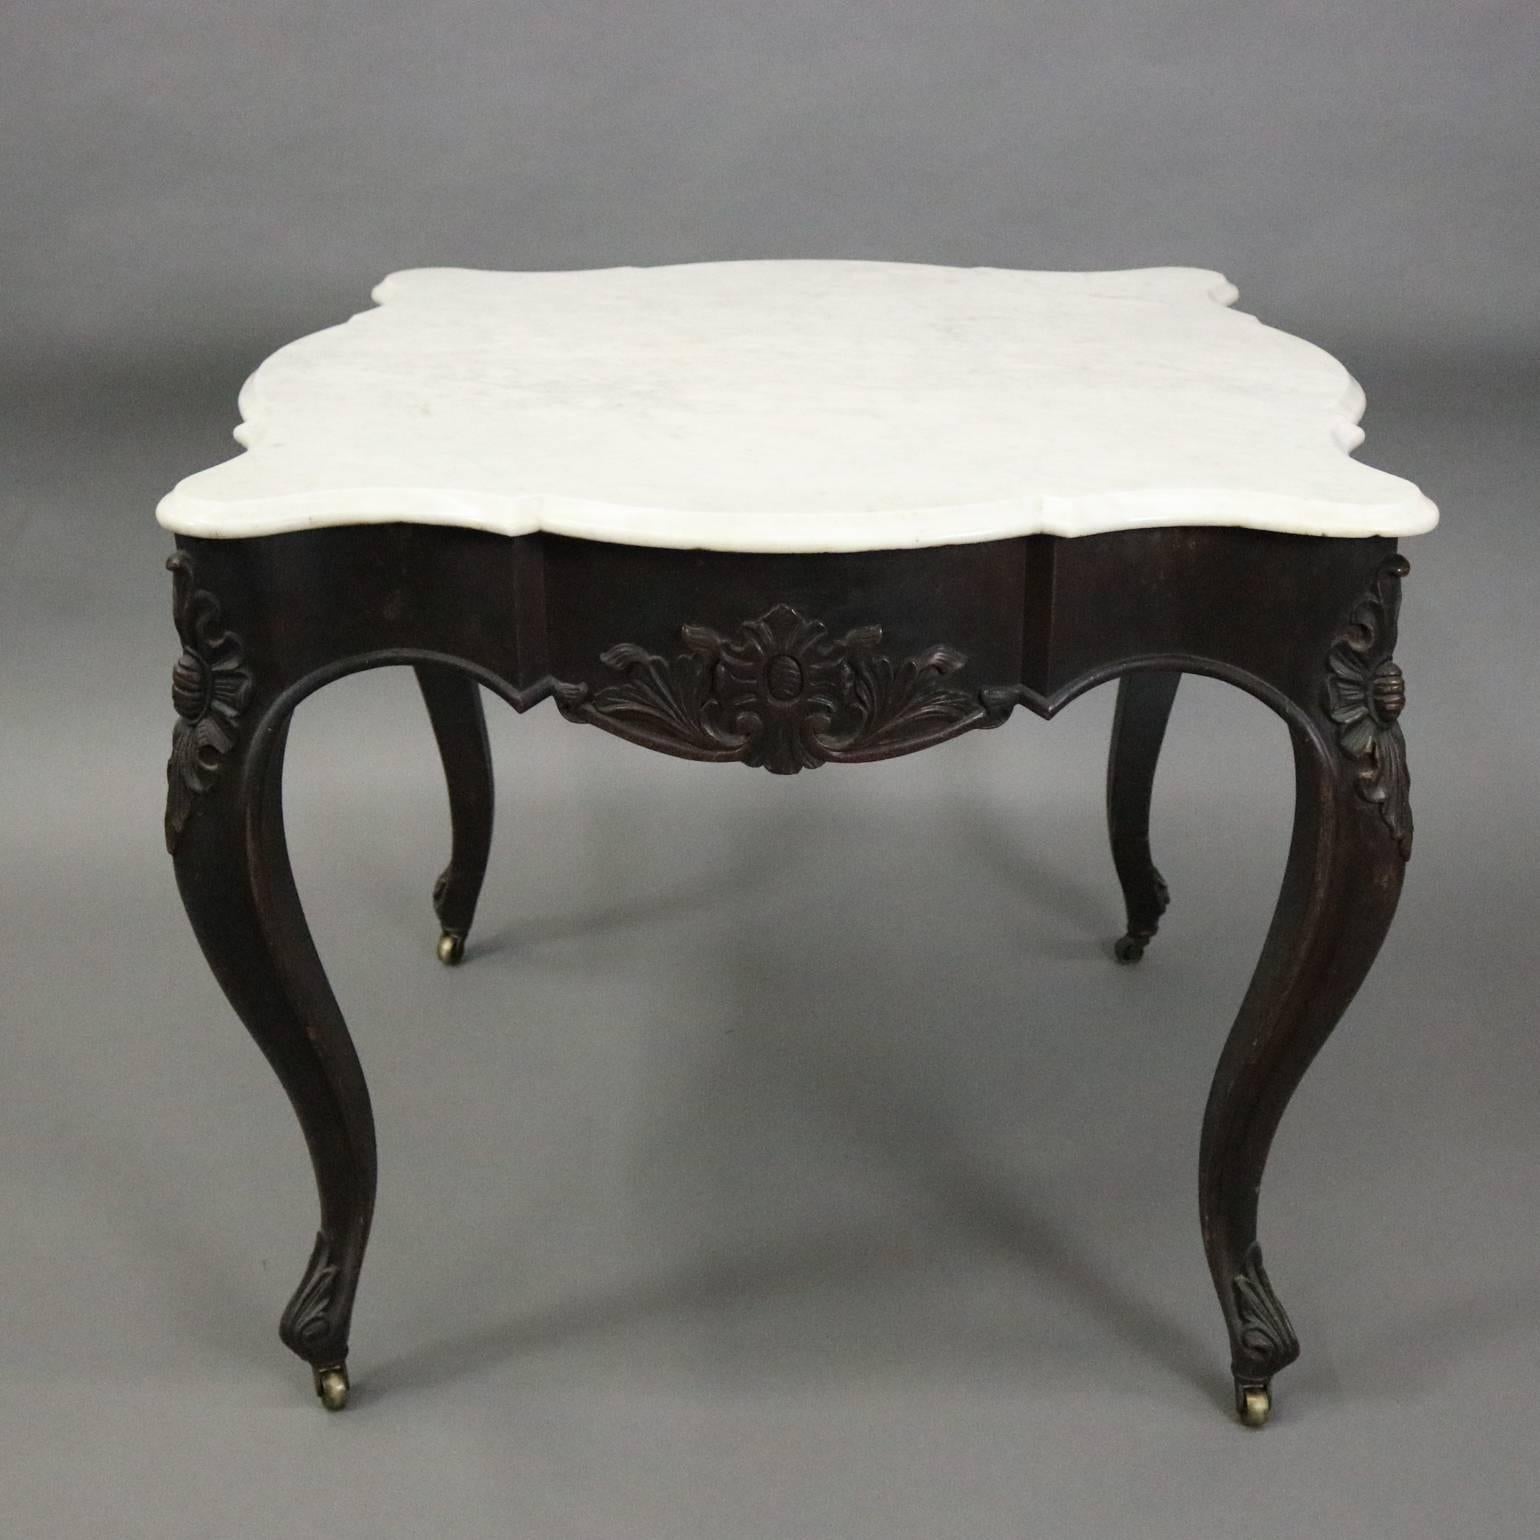 Antique French turtle top game table features walnut construction with carved foliate decoration, cabriole legs, and a scallop form marble top, circa 1880

Measures: 30